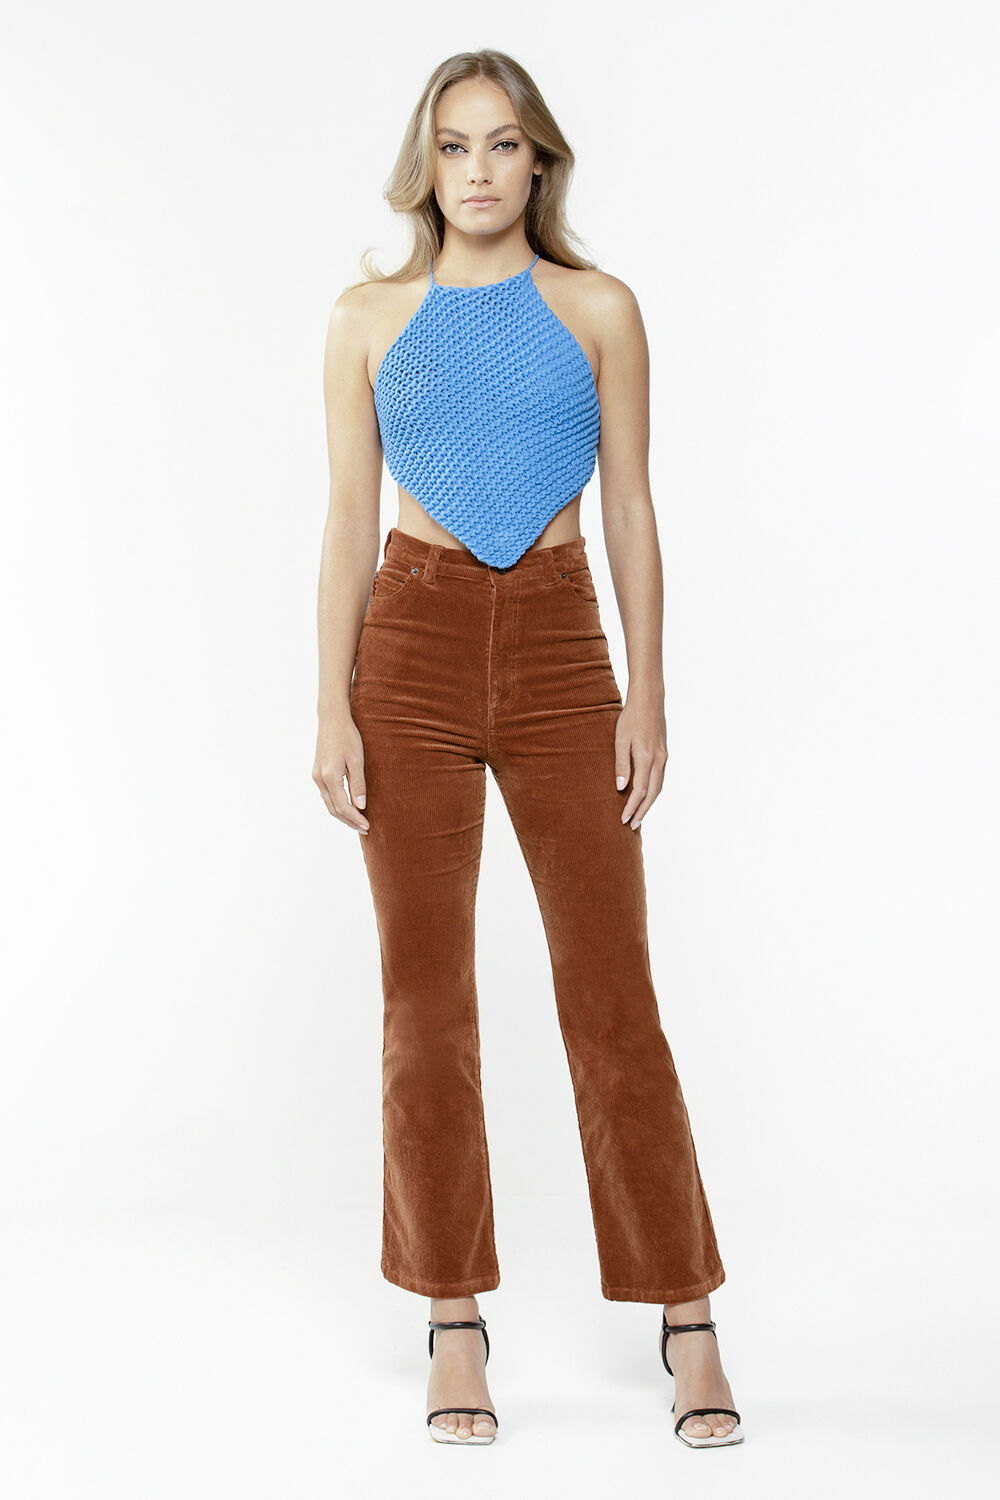 BOOTY CORD HIGH WAIST PANT in colour ROOT BEER